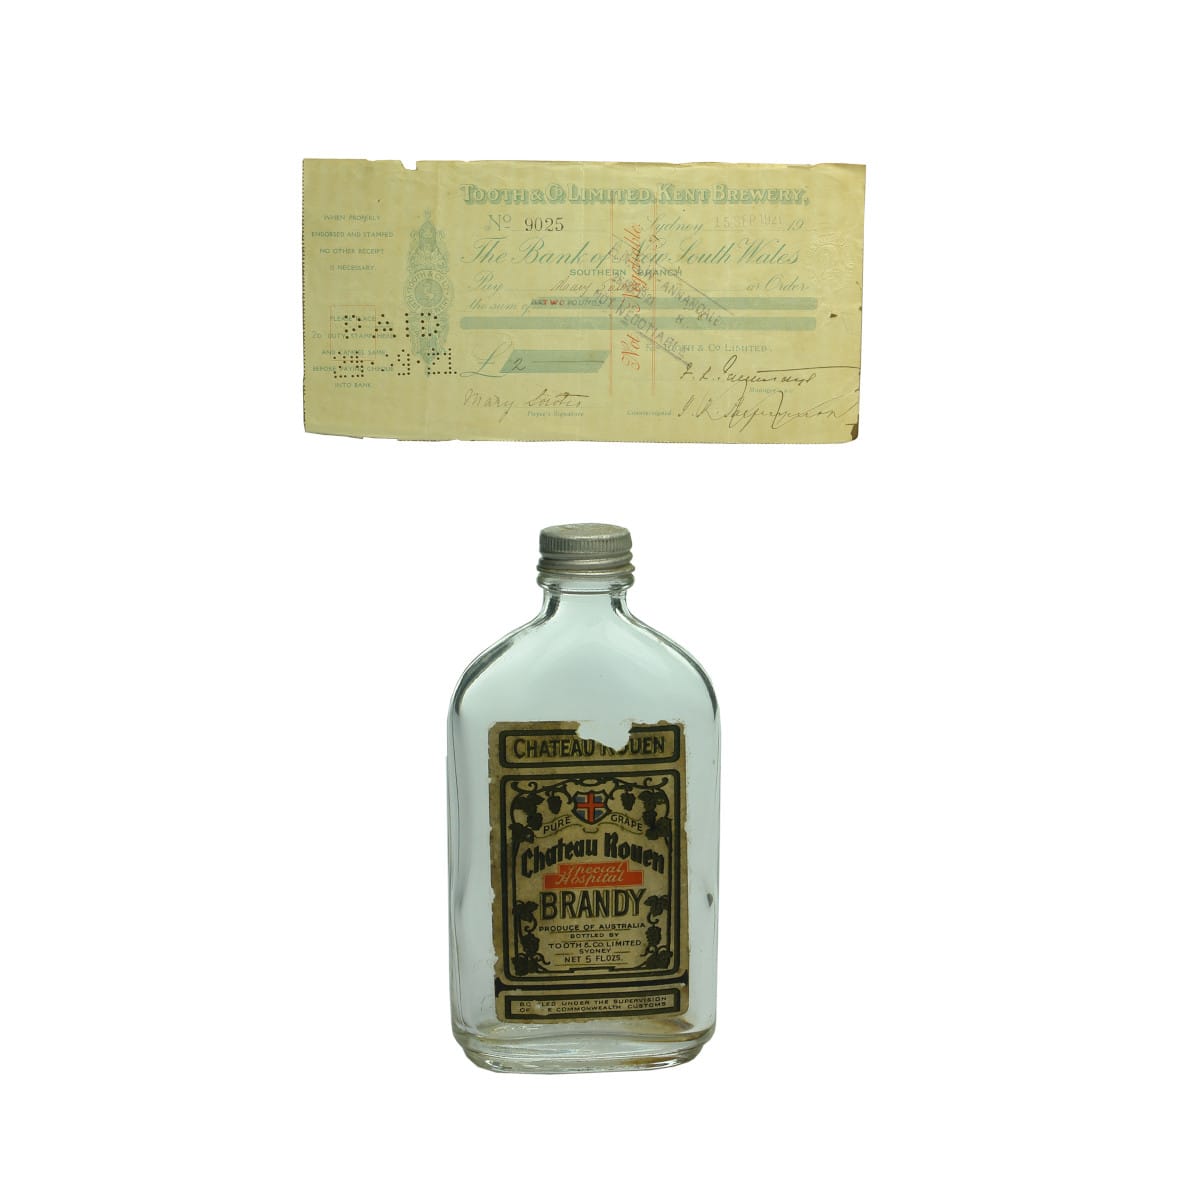 2 Items. Tooth & Co Kent Brewery Cheque from 1921; Labelled brandy flask. Chateau Rouen Hospital Brandy. (New South Wales)